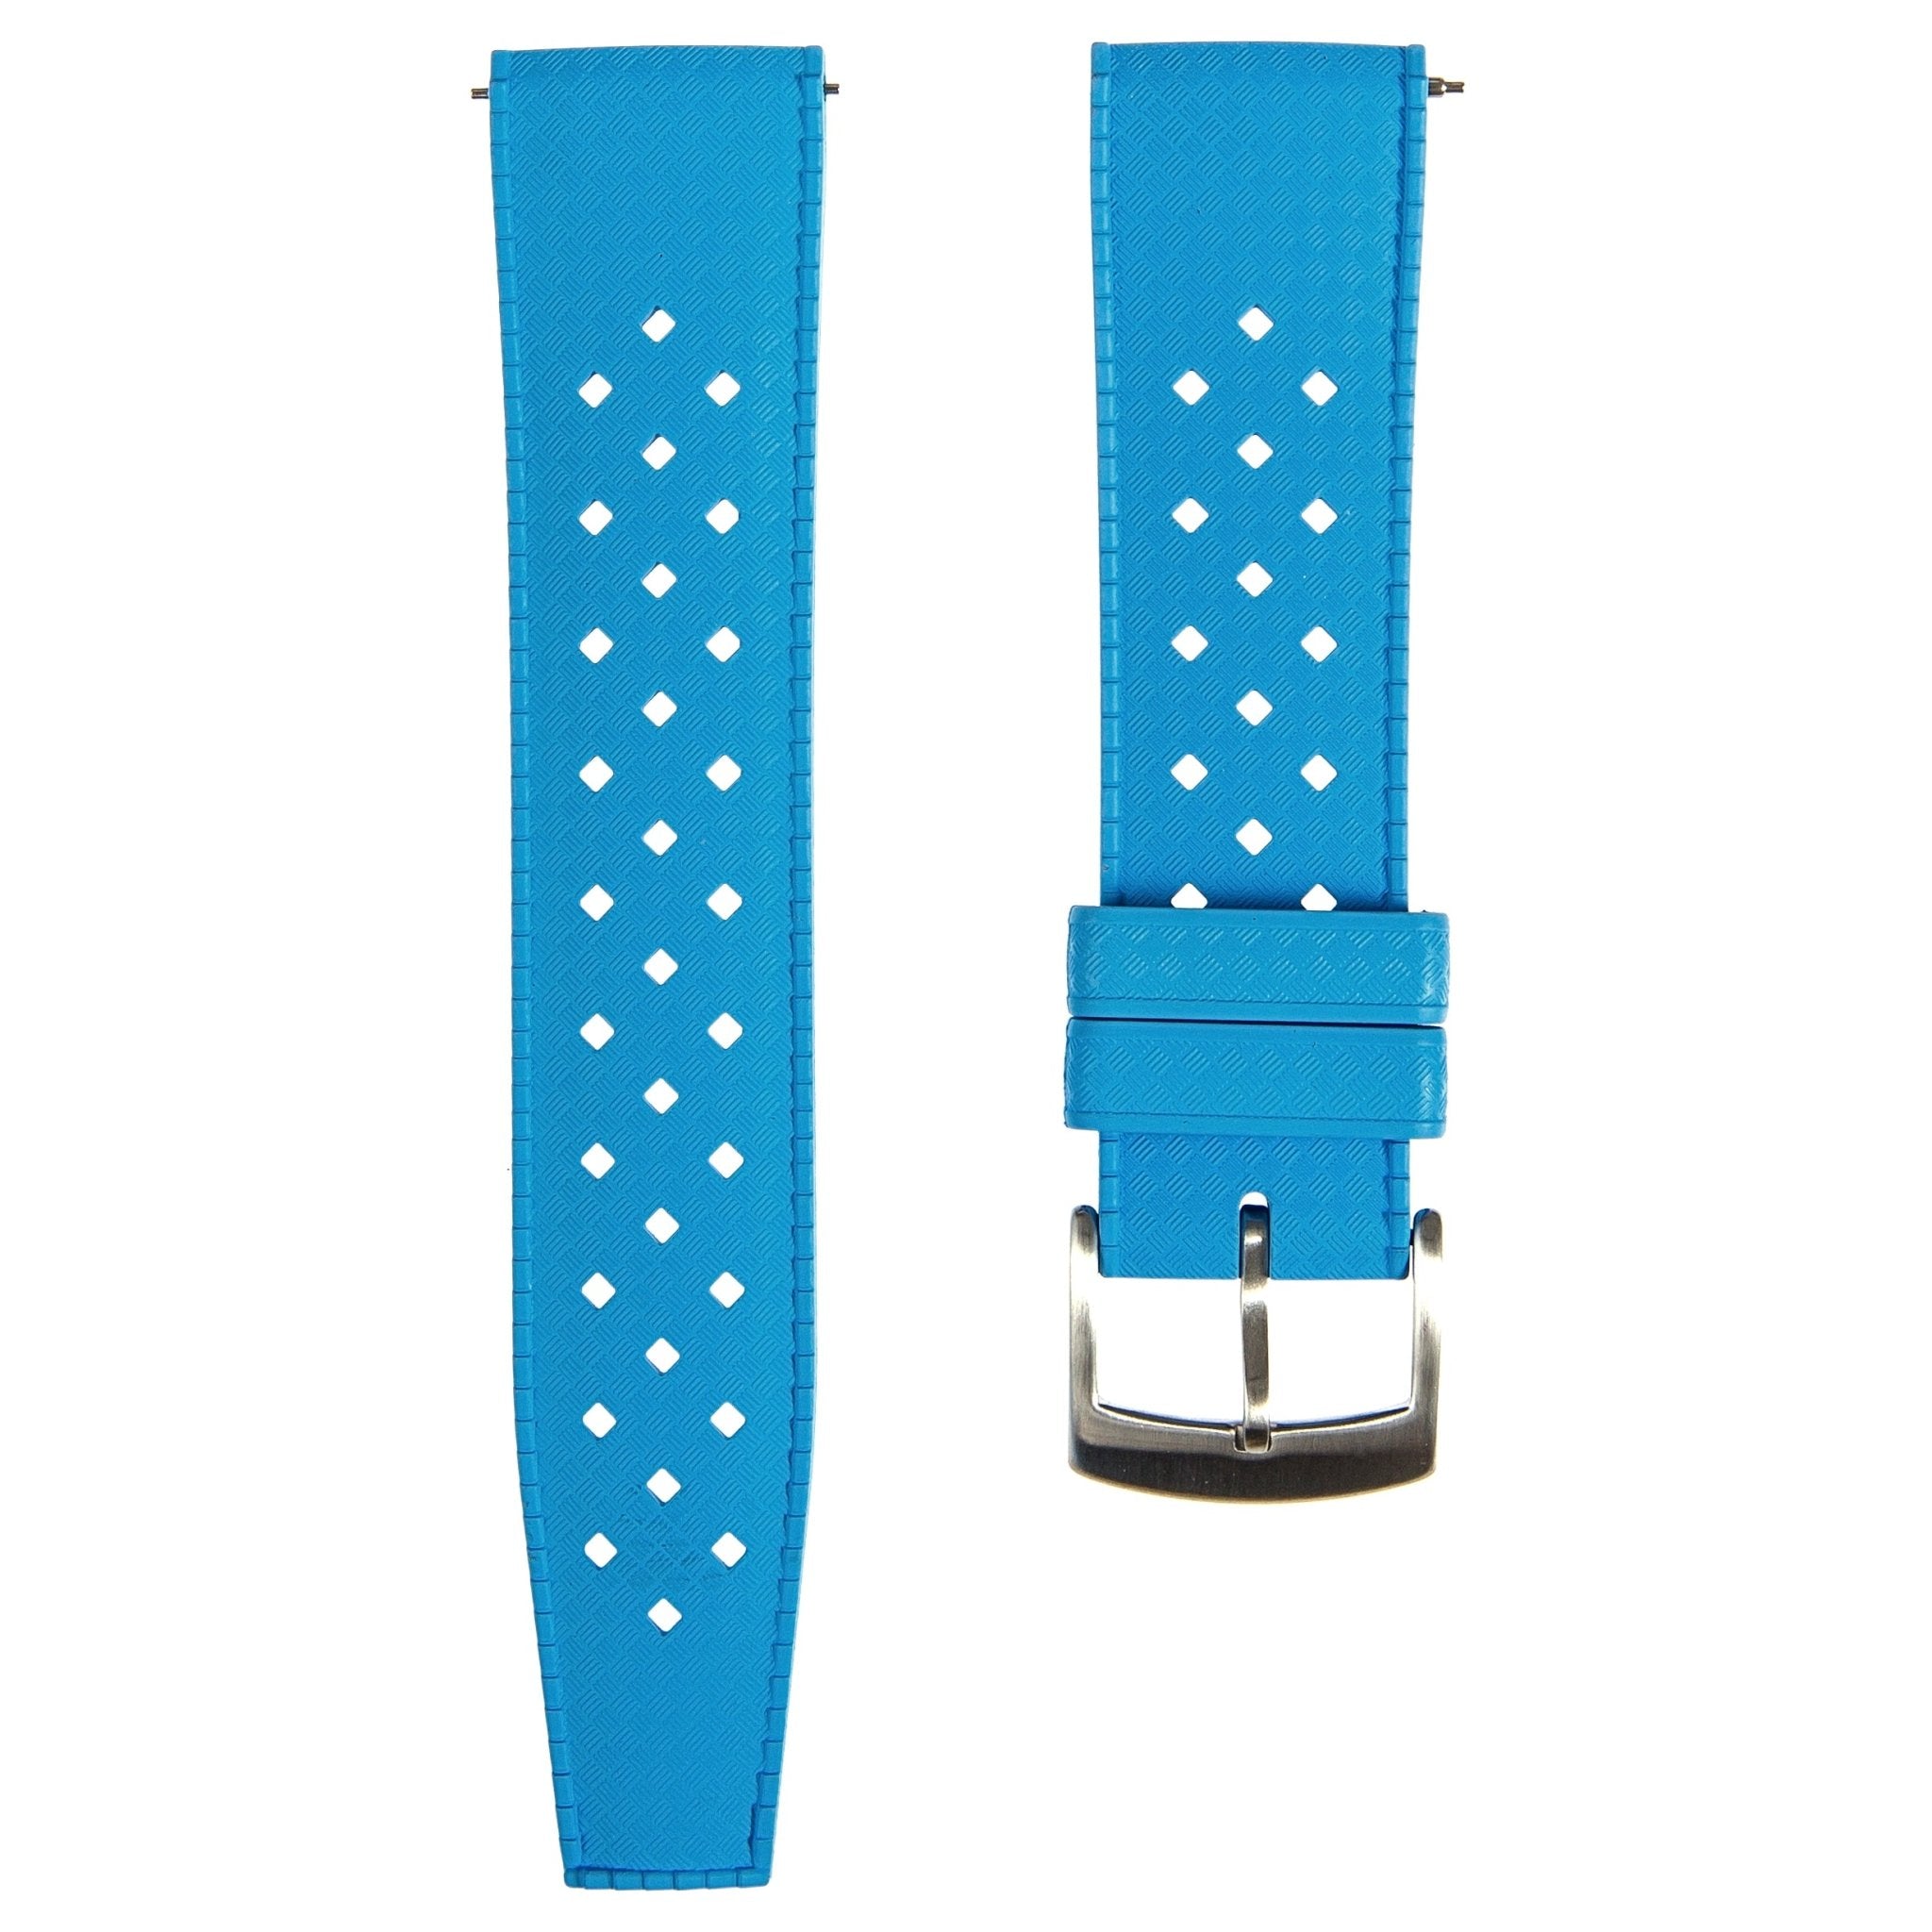 Calypso Tropical Style FKM Rubber Strap- Quick-Release-Compatible with Omega x Swatch - Turquoise (2422) -Strapseeker